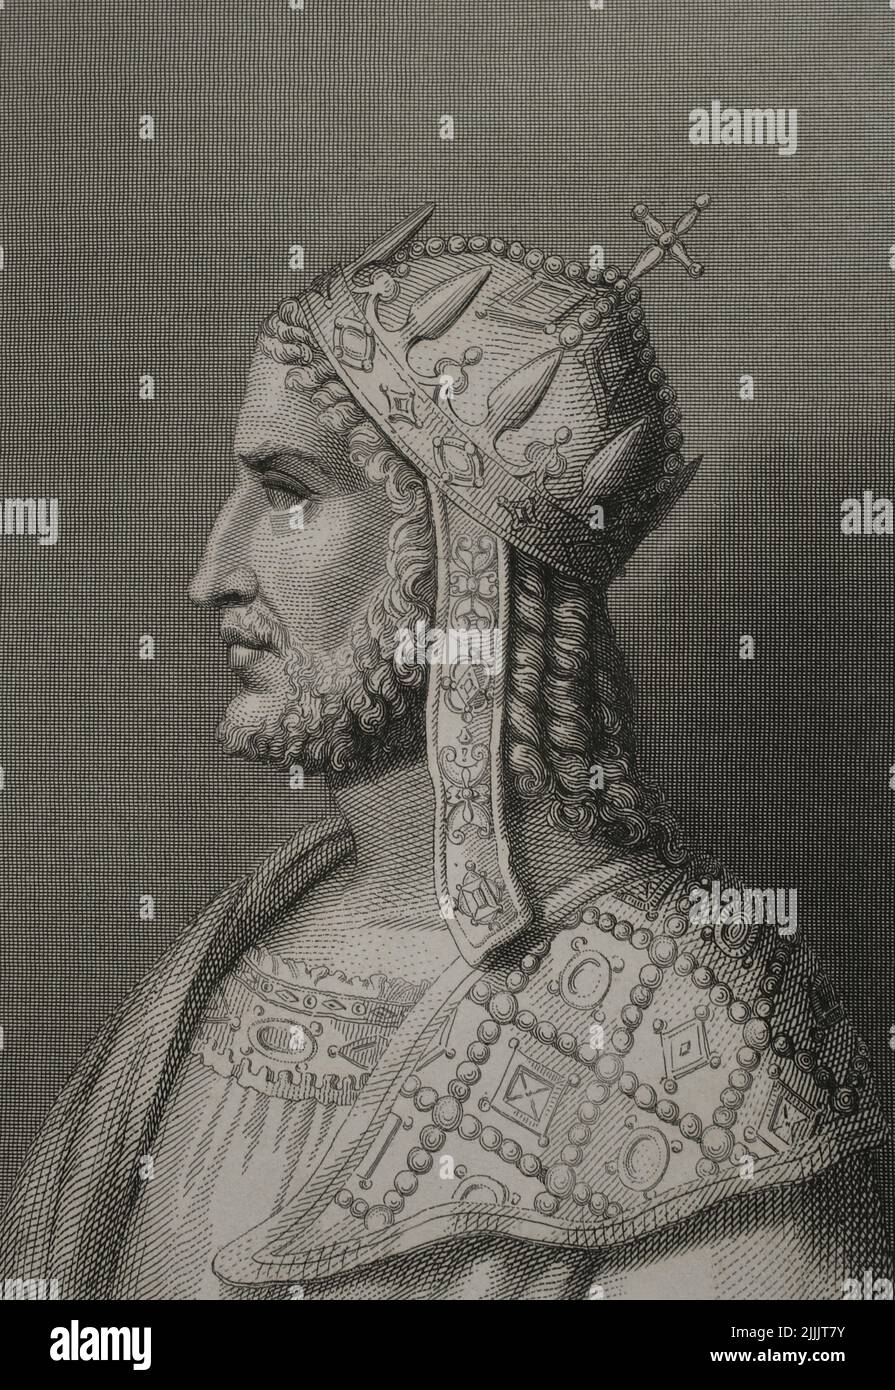 Justinian I the Great (482-565). Emperor of the Eastern Roman Empire. Portrait. Engraving. 'Historia Universal', by César Cantú. Volume VIII. 1858. Stock Photo